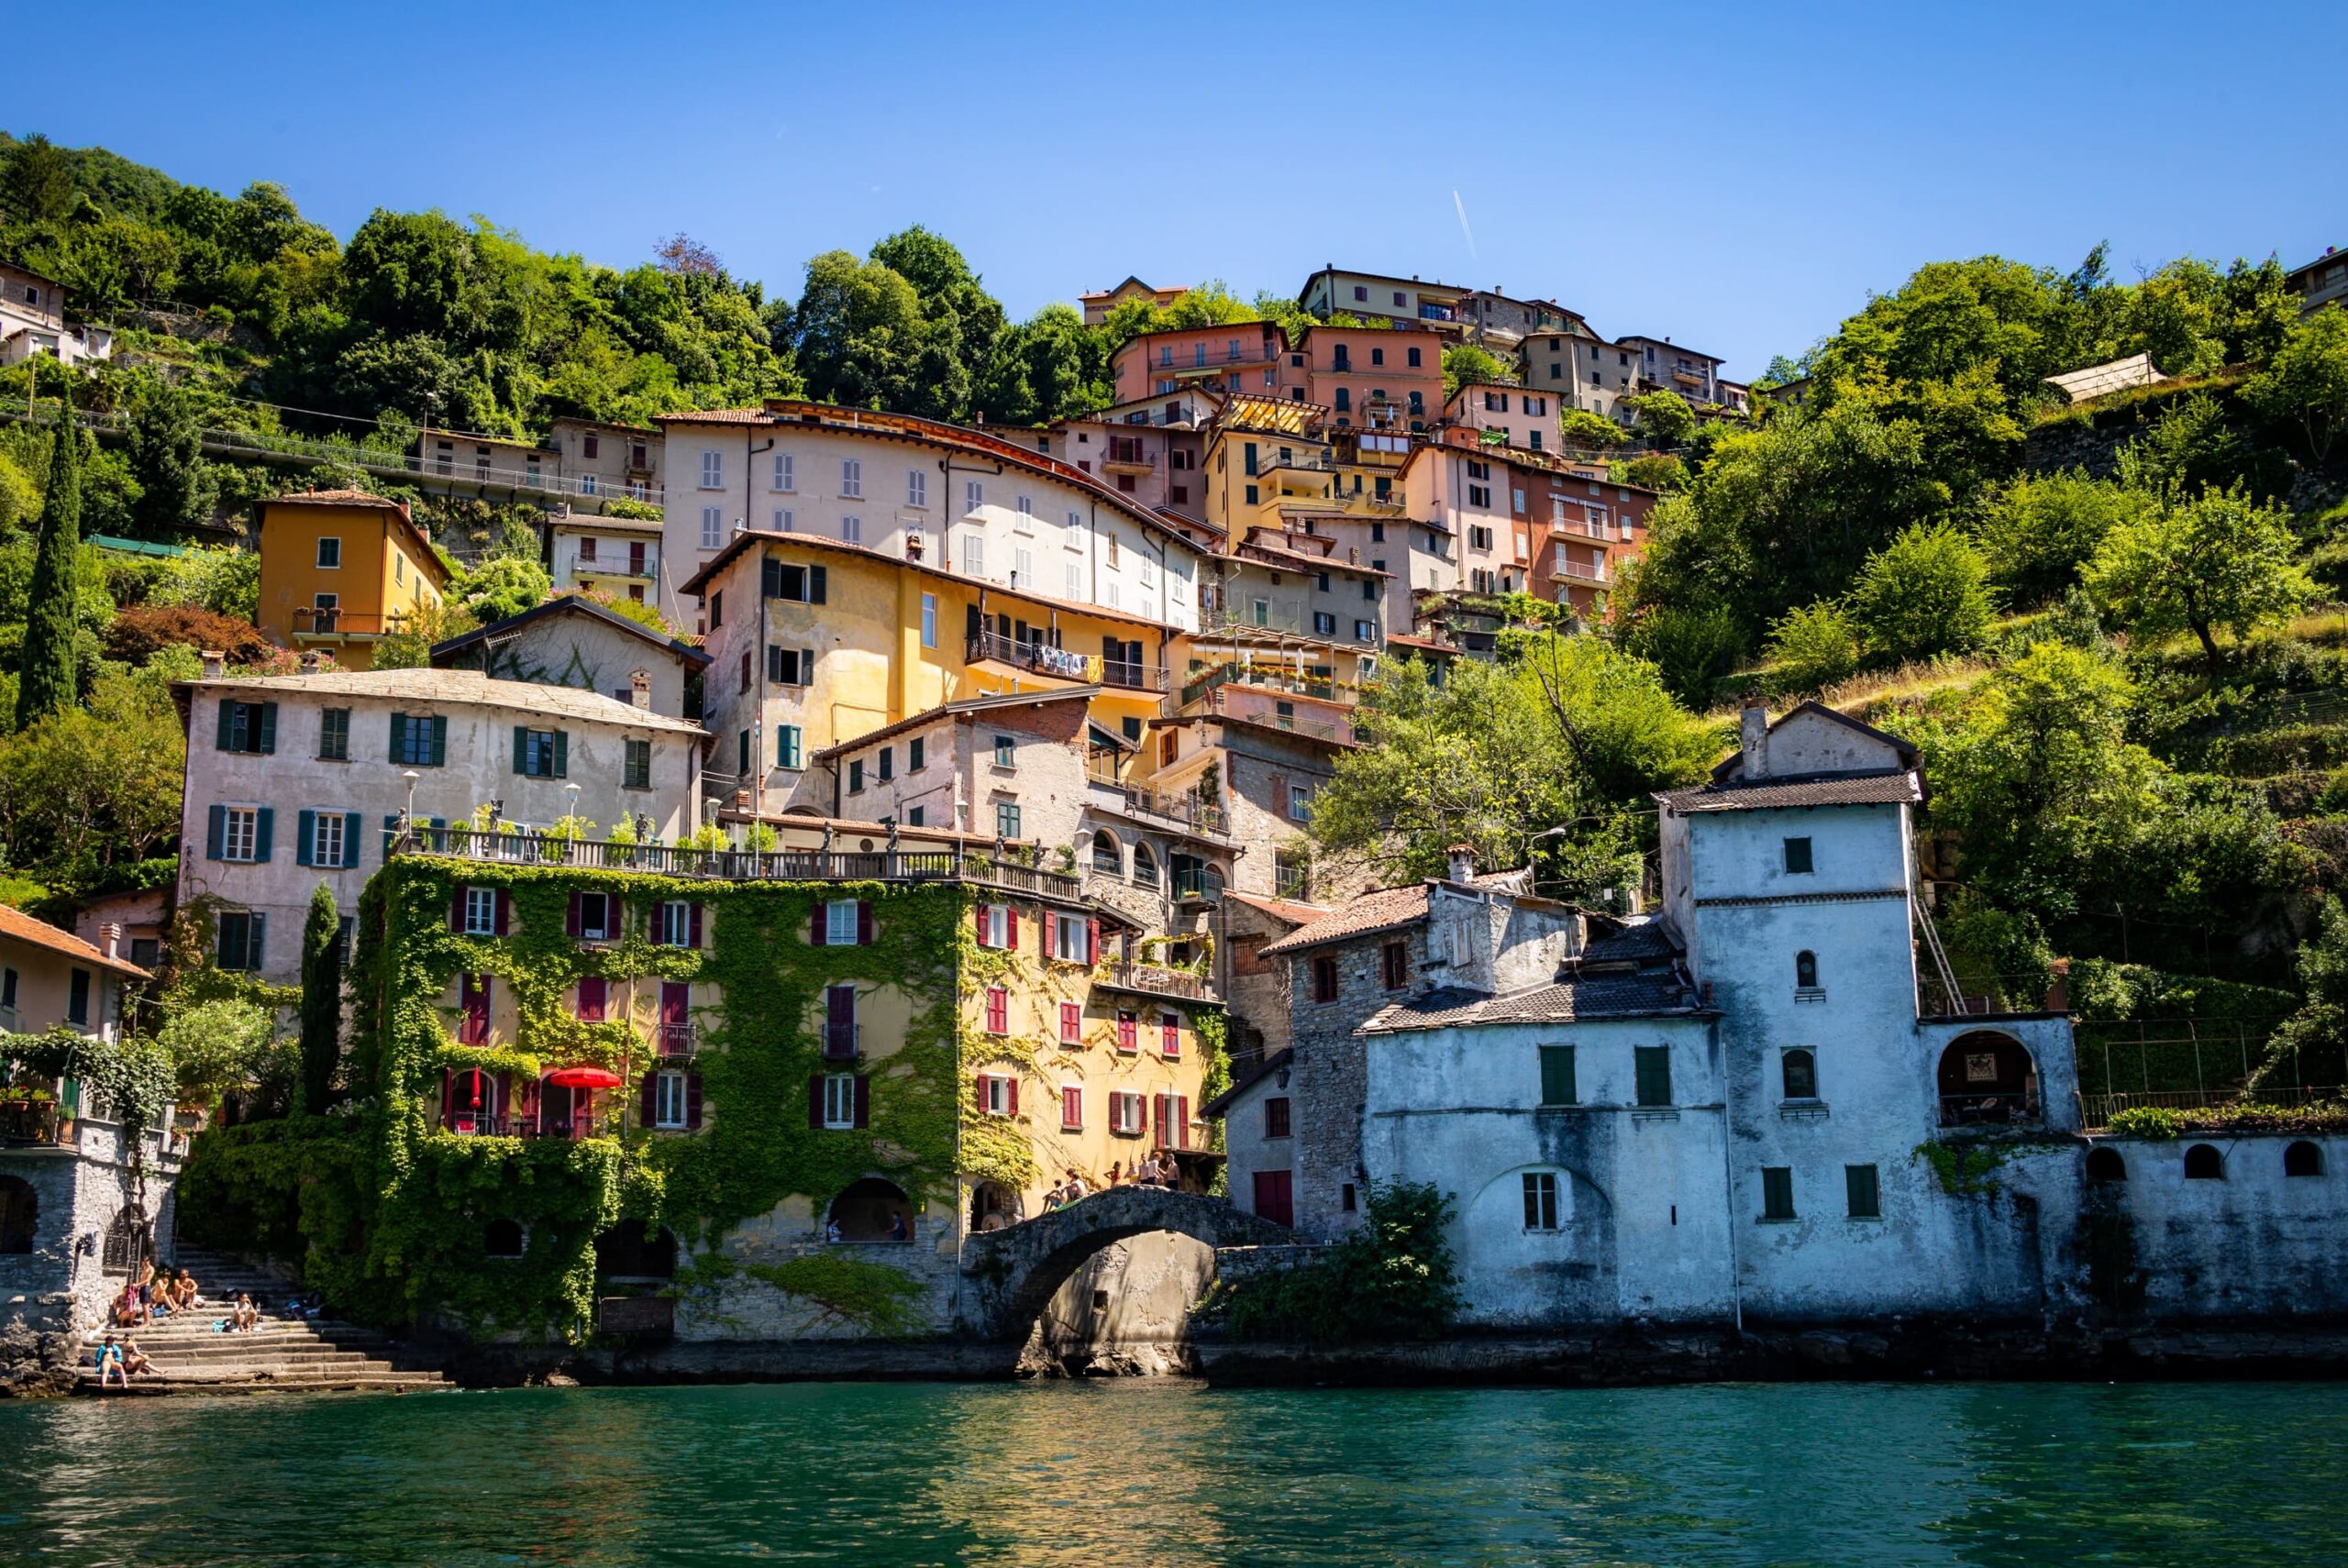 Lake Como - town of Nesso with its bridge